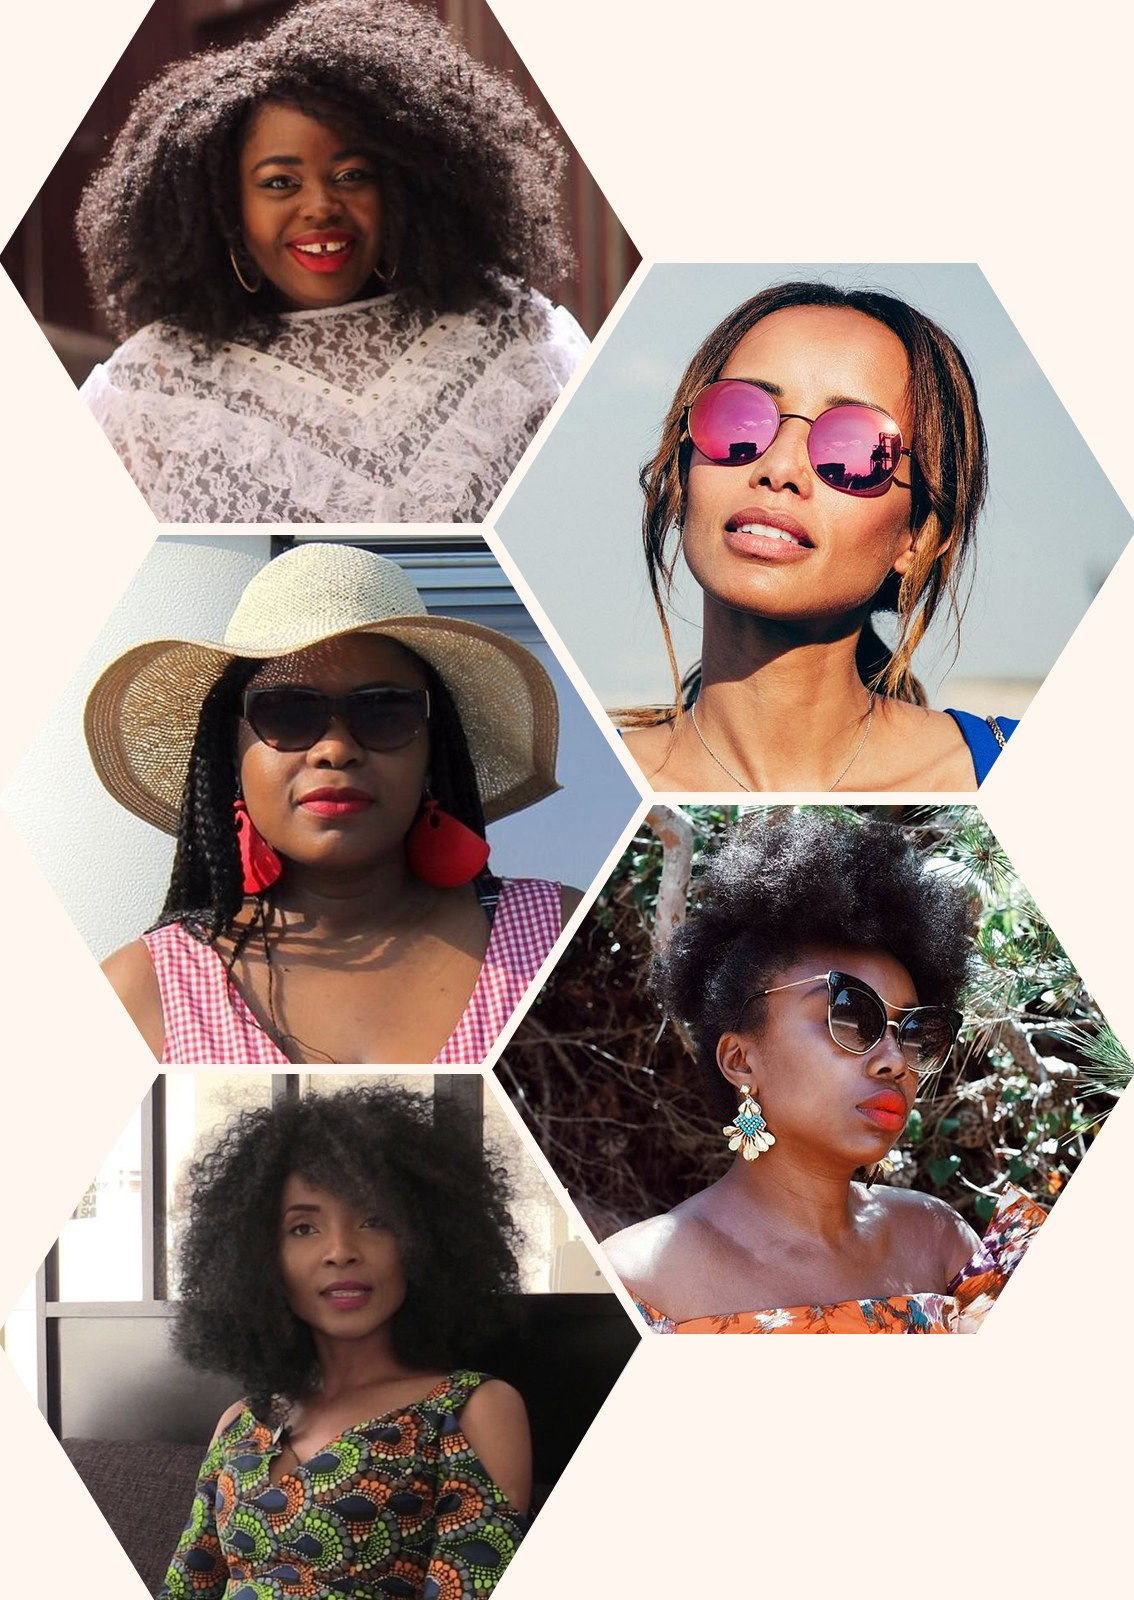 THIS IS FRENCH-GIRL BEAUTY. FROM TOP LEFT TO RIGHT: BLOGGER [GAËLLE PRUDENCIO](https://www.instagram.com/gaelleprudencio/){: rel=nofollow}, ACTRESS [SONIA ROLLAND](https://www.instagram.com/soniarolland/){: rel=nofollow}, BLOGGER [DANIELLE AHANDA](https://www.instagram.com/bestofd/){: rel=nofollow}, BLOGGER AND AUTHOR [FATOU D'NIADYE](https://www.instagram.com/blackbeautybag/){: rel=nofollow}, AND STYLIST [NATACHA BACO](https://www.instagram.com/by_natachabaco/){: rel=nofollow}. PHOTO: ART BY EMILY KEMP. PHOTOS COURTESY OF INSTAGRAM.